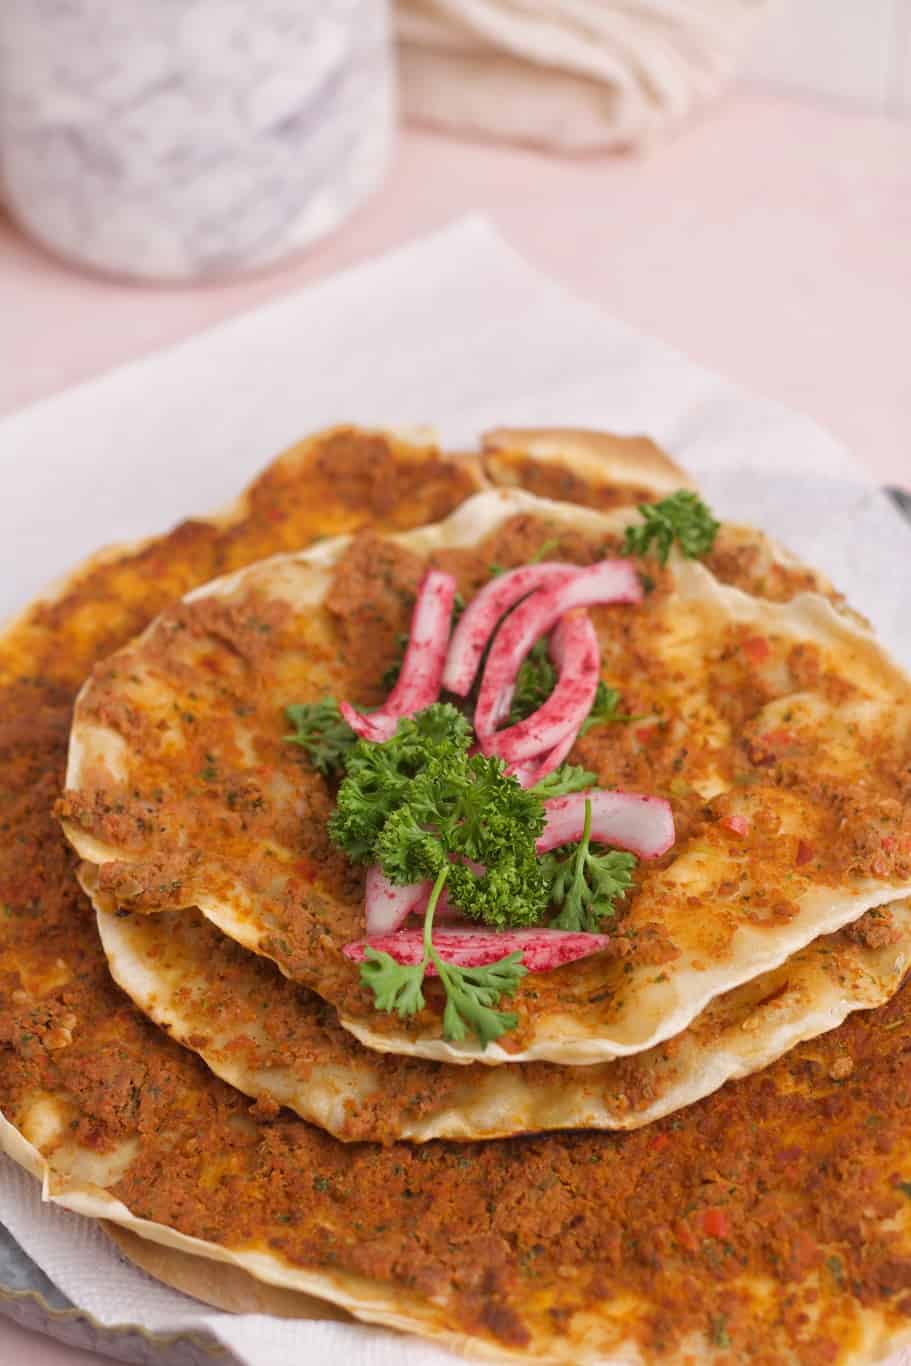 Turkish Lahmajoun wrap made with a mixture of juicy meat, veggies, savory spices, and seasonings and topped with onions and sumac